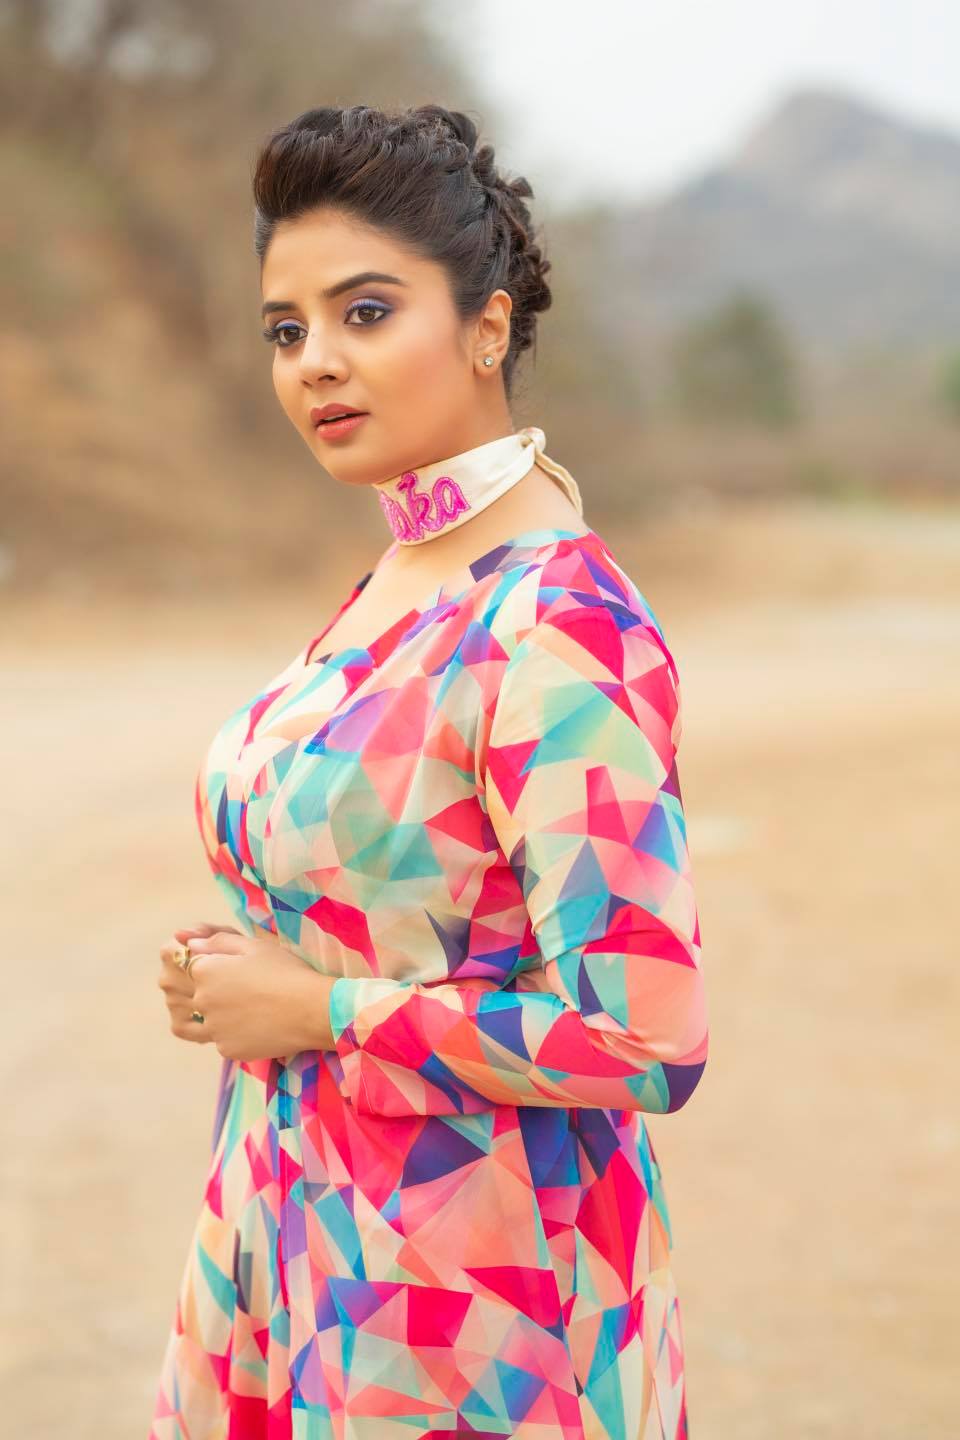 Latest Pictures Of Actress Sreemukhi Will Make You Fall In Love With ...